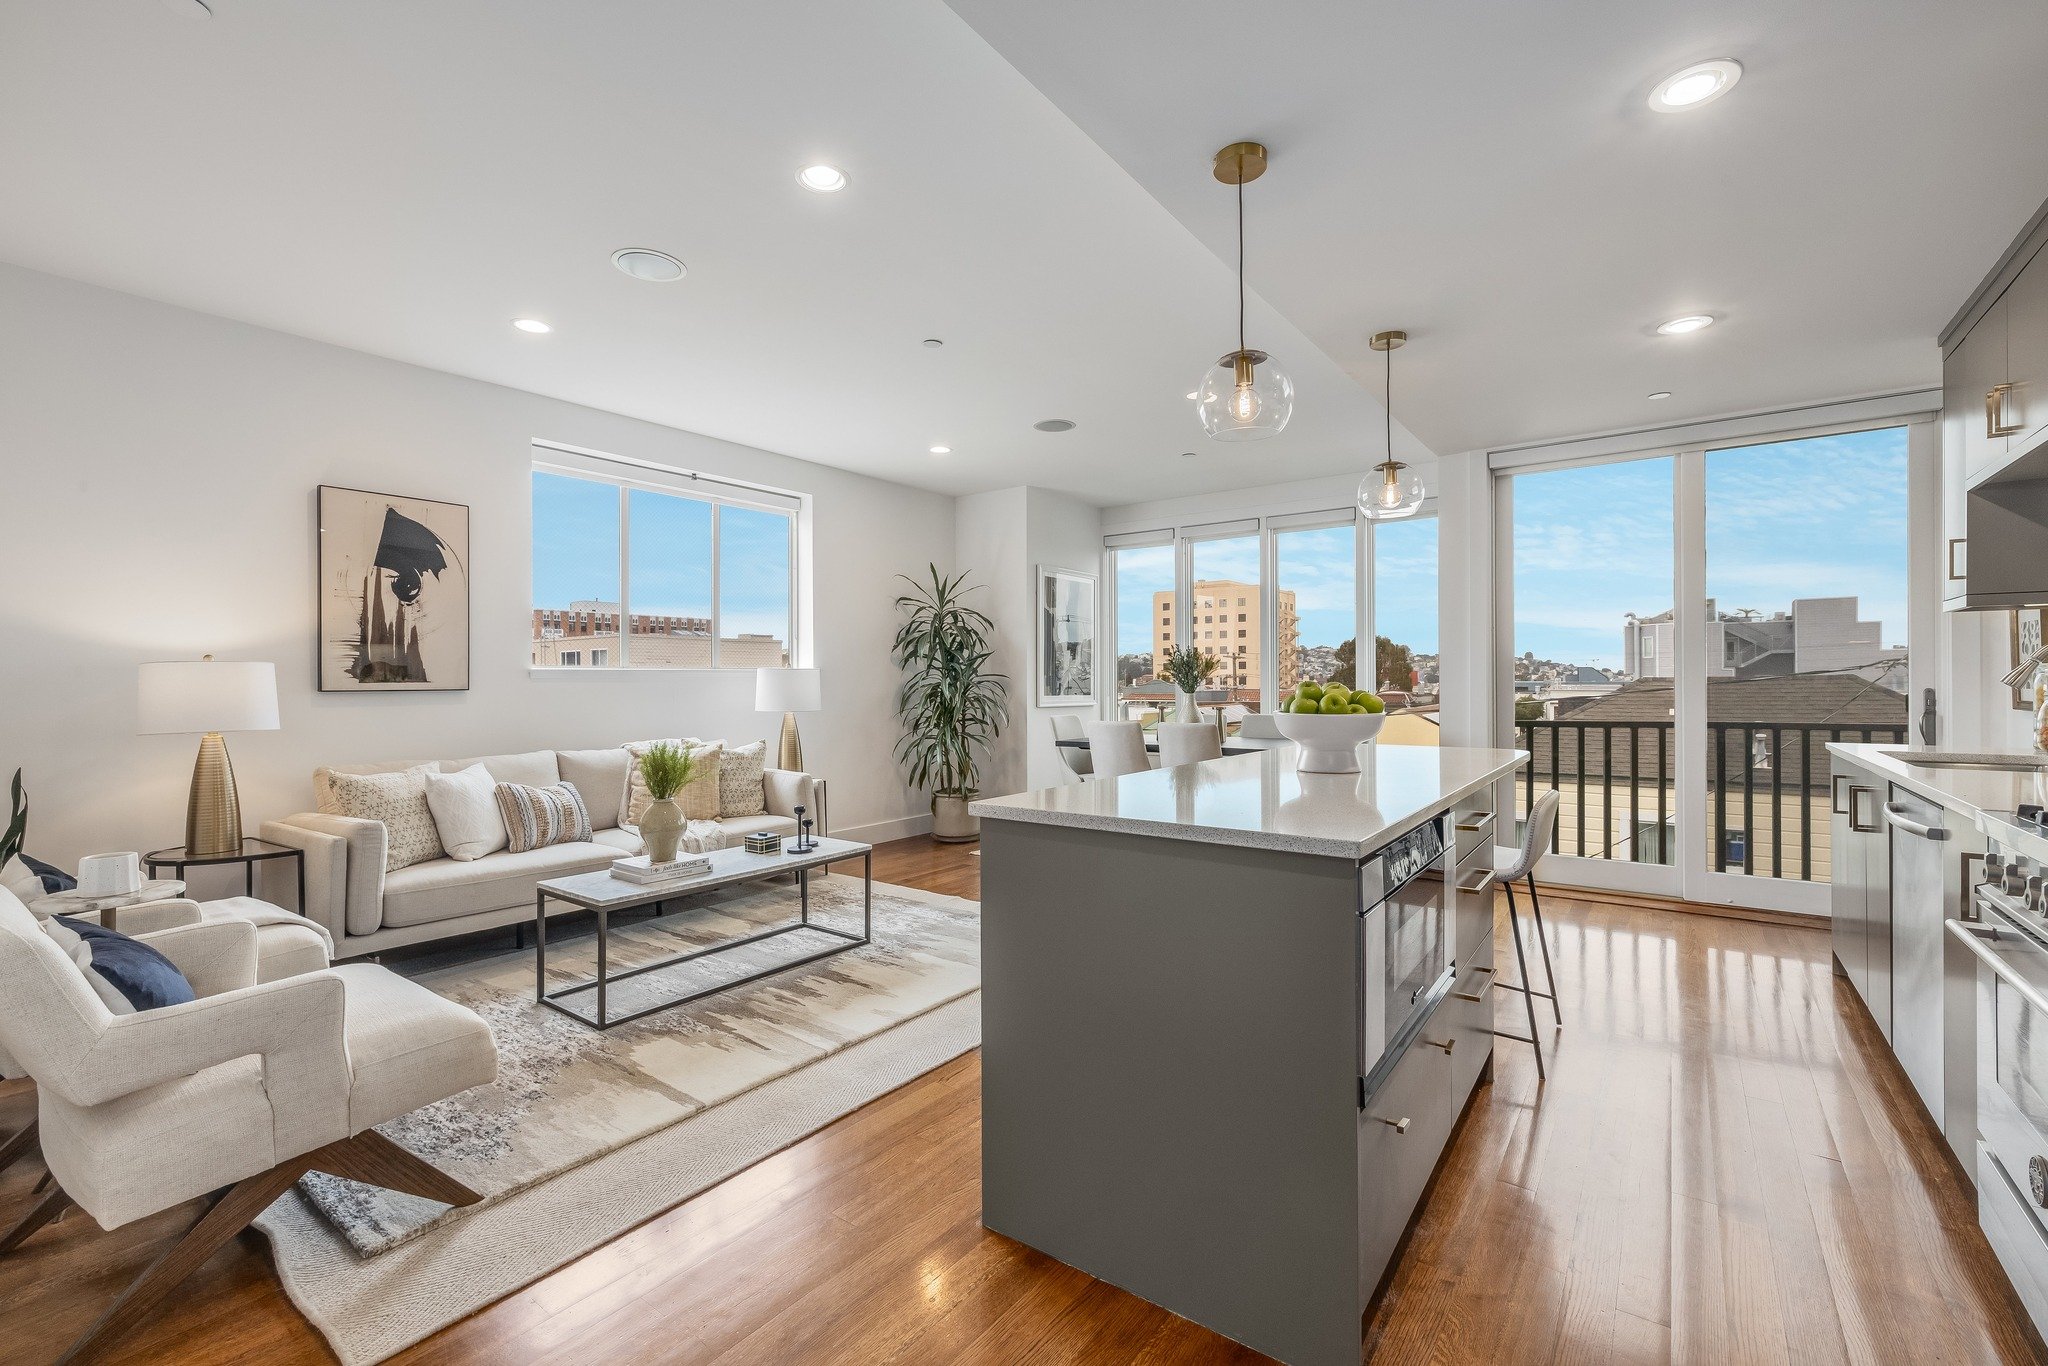 Client Spotlight: @asonbuttorfrealestate , Compass

Amazing pent-level 2-story townhome in the highly desirable boutique building, 1495 Valencia, newly constructed in 2009! 2 bedrooms, 2.5 baths on 2 levels with ~1,300 square feet (per appraisal). Op